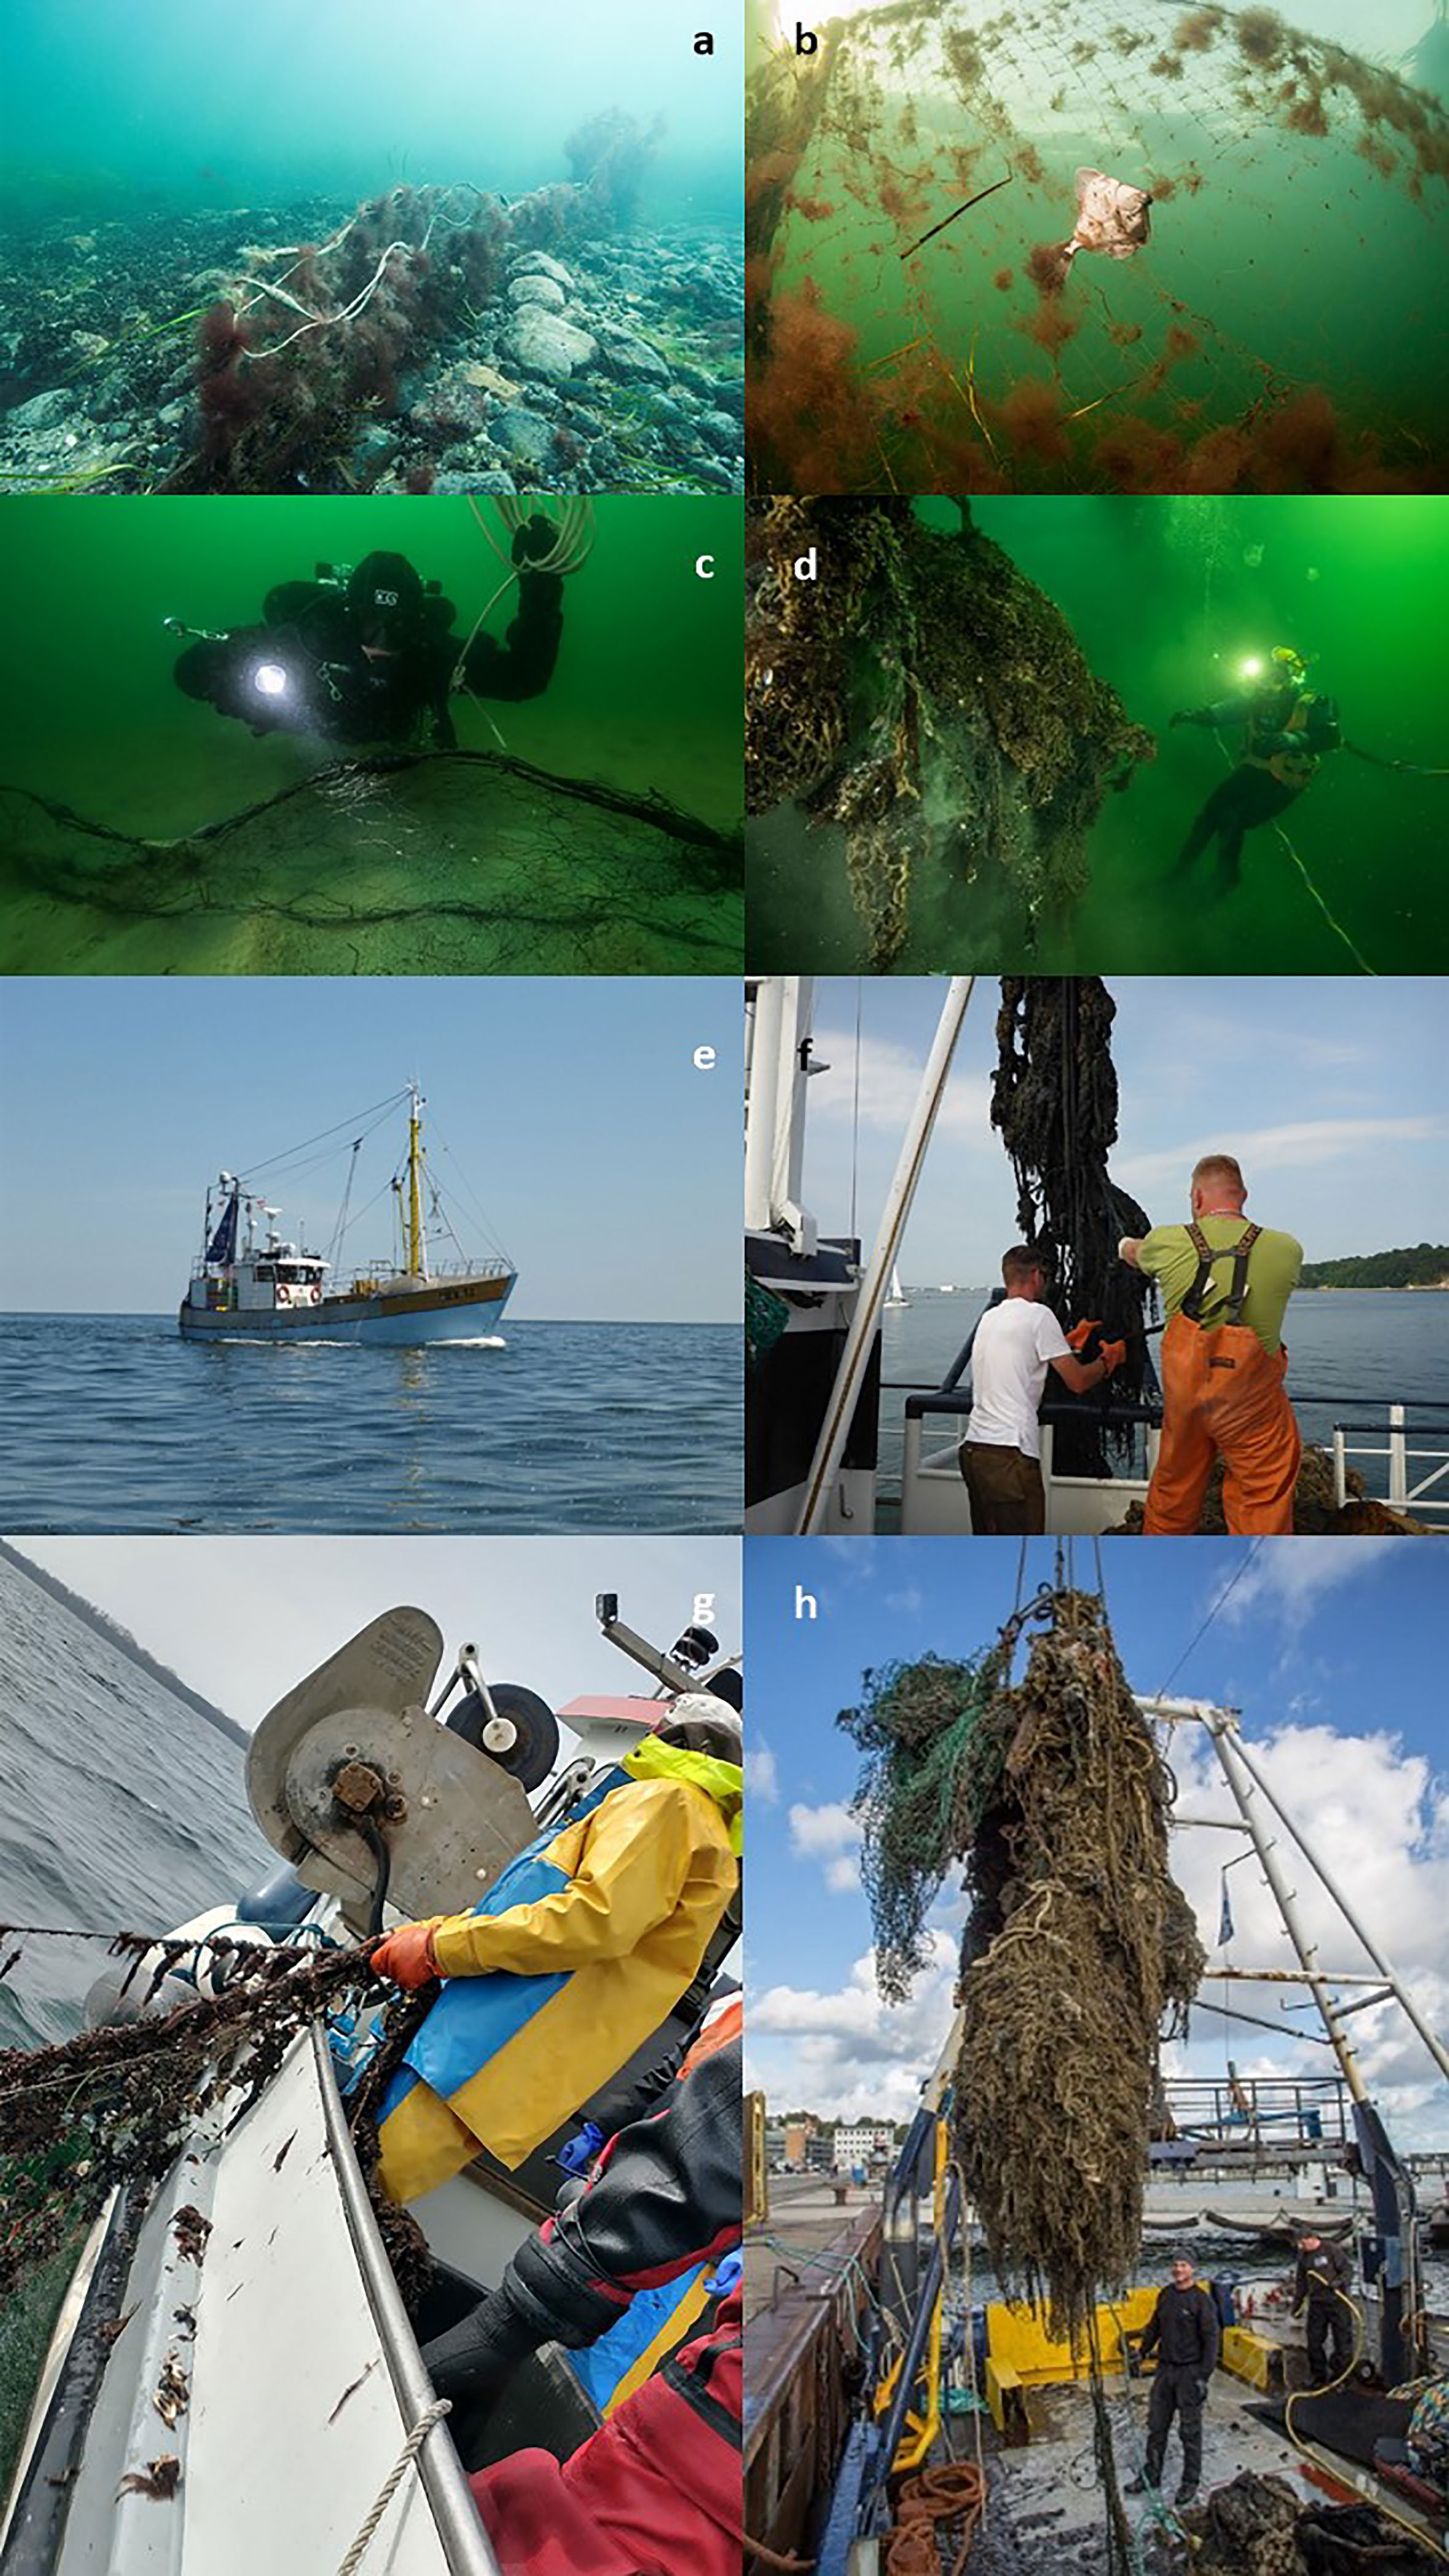 Fishing gear used along the Swedish west coast to target Norway lobster